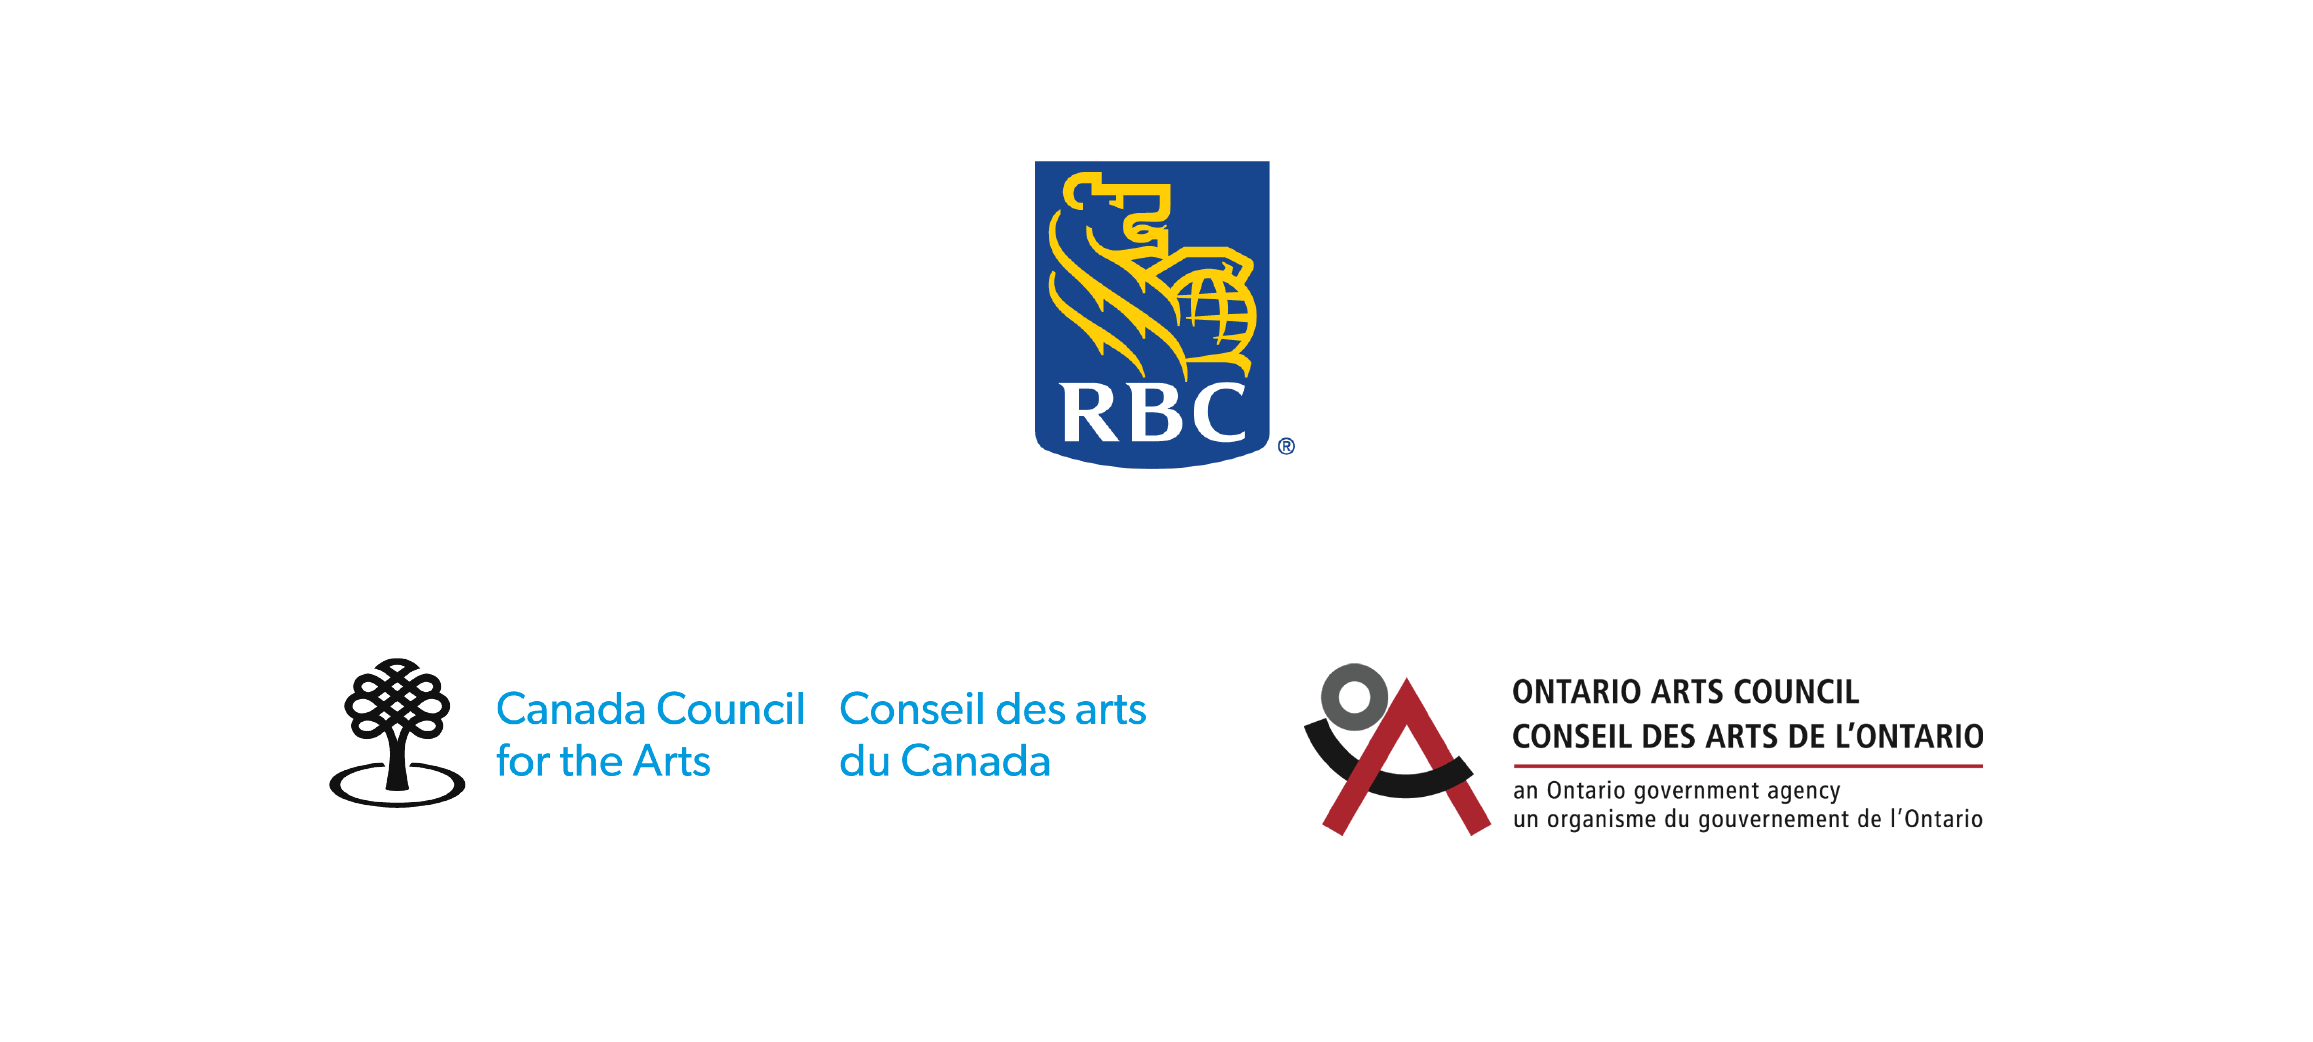 Funder logos for I HeART Main Street 2023-24 include RBC, the Canada Arts Council, and the Ontario Arts Council